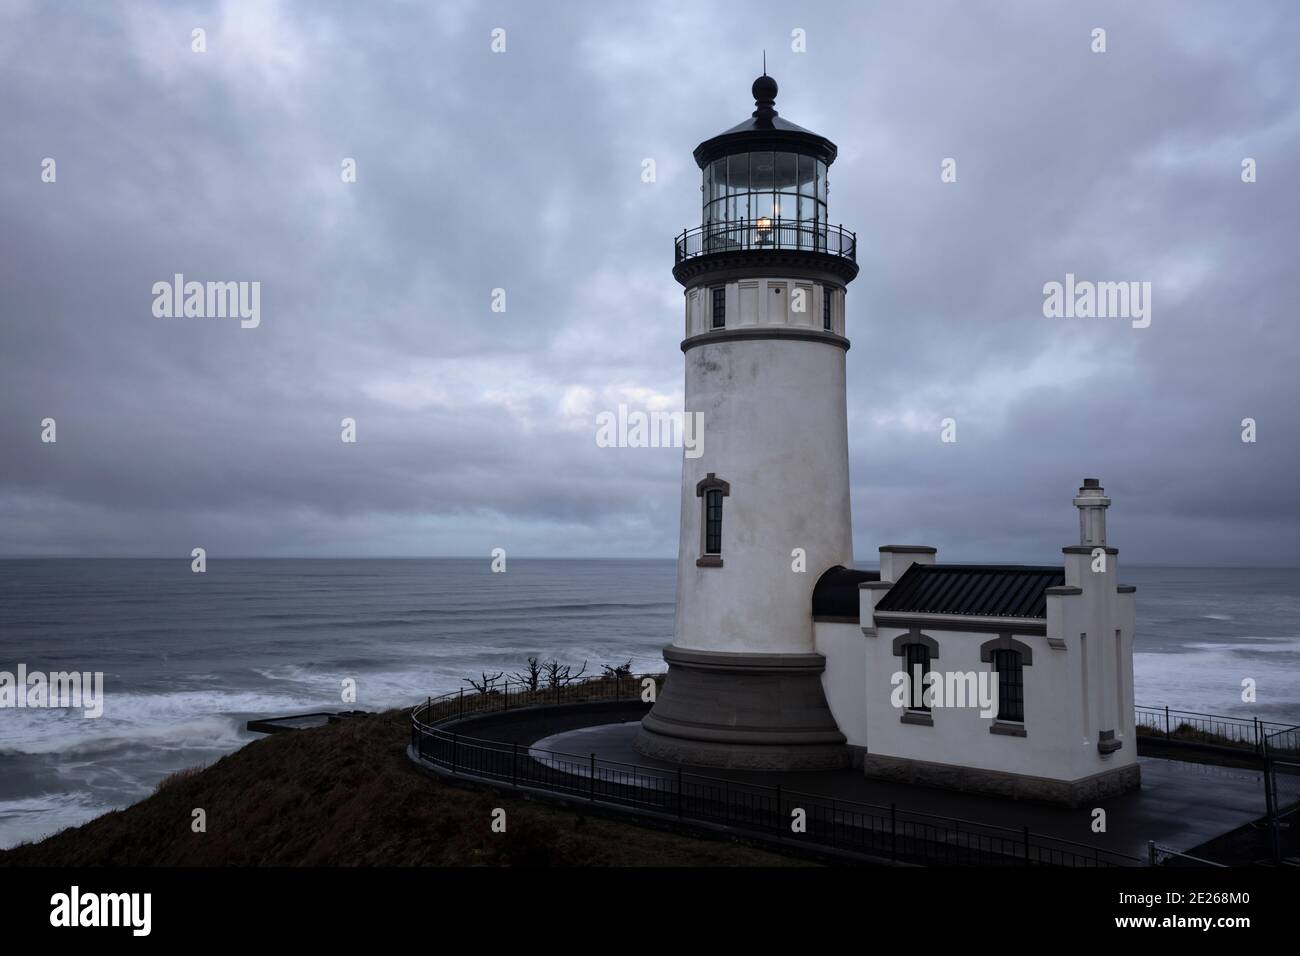 WA19106-00...WASHINGTON - Cloudy morning sunrise at North Cape Lighthouse in Cape Disappointment State Park. Stock Photo